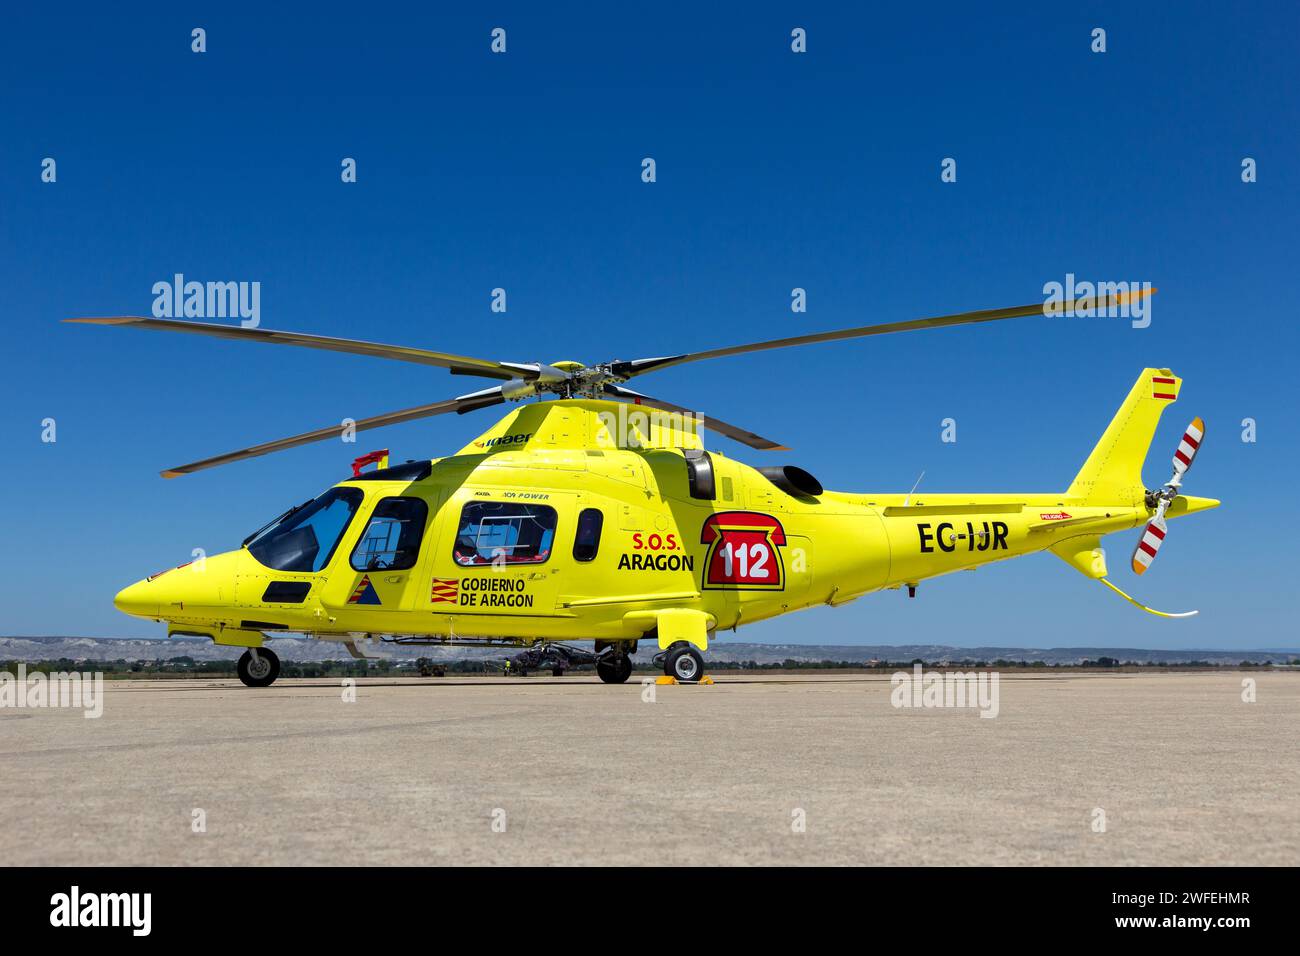 Agusta A109 Power resque helicopter from Inaer on the tarmac of Zaragoza airbase. Zaragoza, Spain - May 20, 2016 Stock Photo